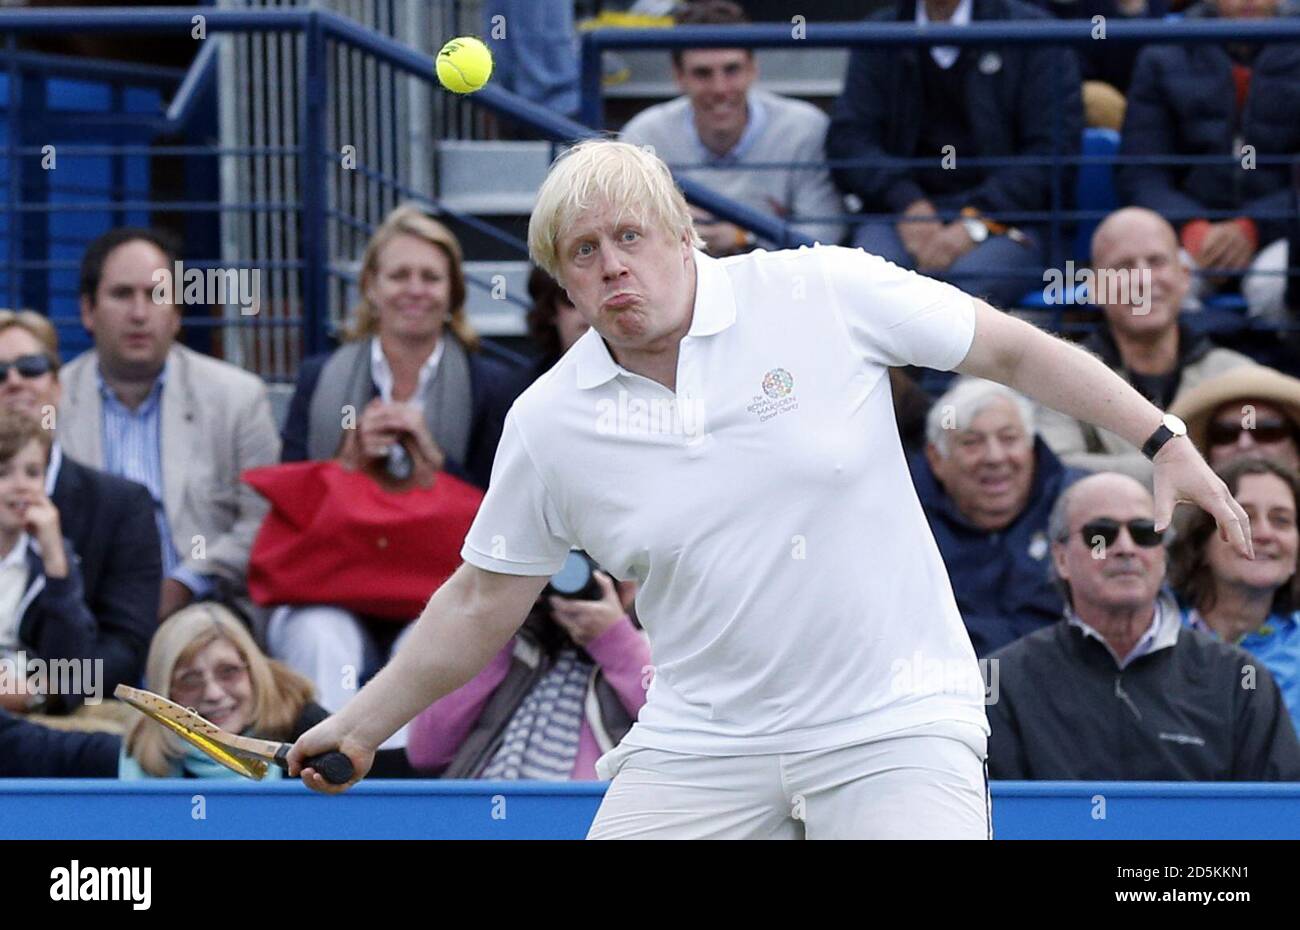 Boris Johnson (centre) takes part in a celebrity tennis match in aid of the Royal Marsden Hospital at The Queen's Club, London.  Stock Photo